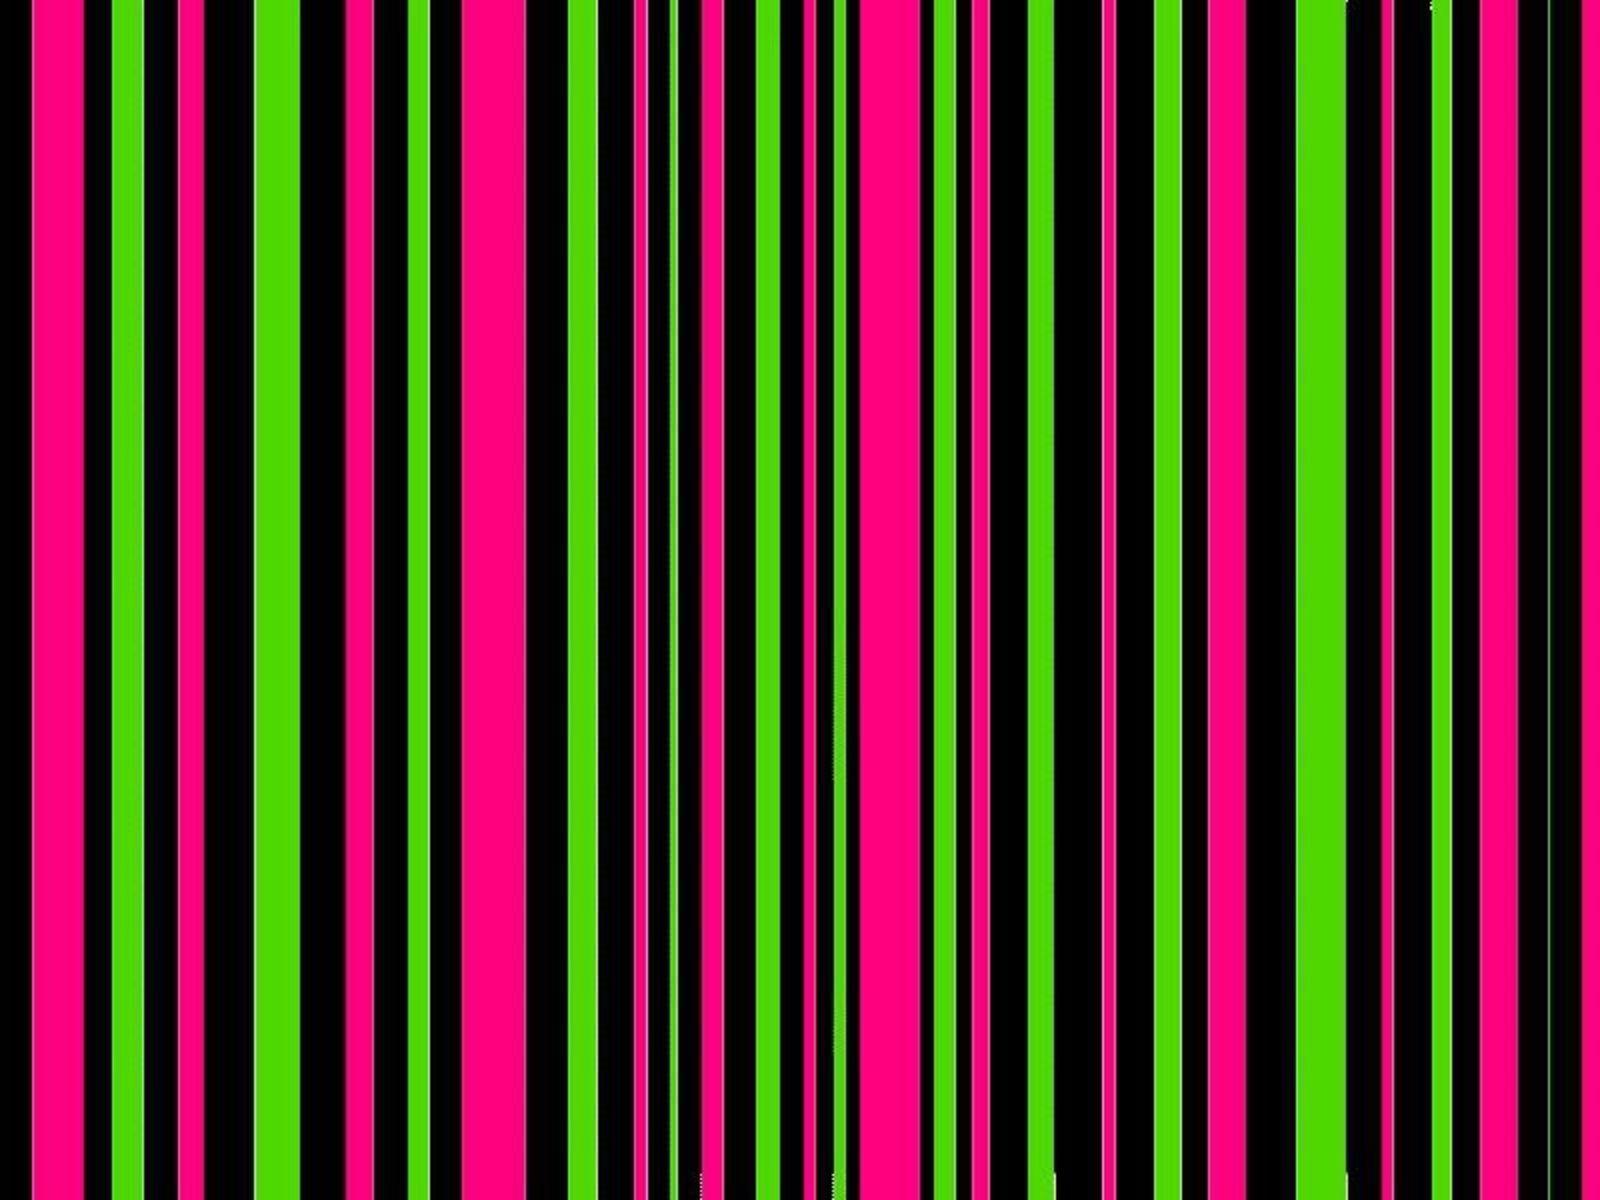 1. Appealing colors This is almost an optical illusion! Neon colors